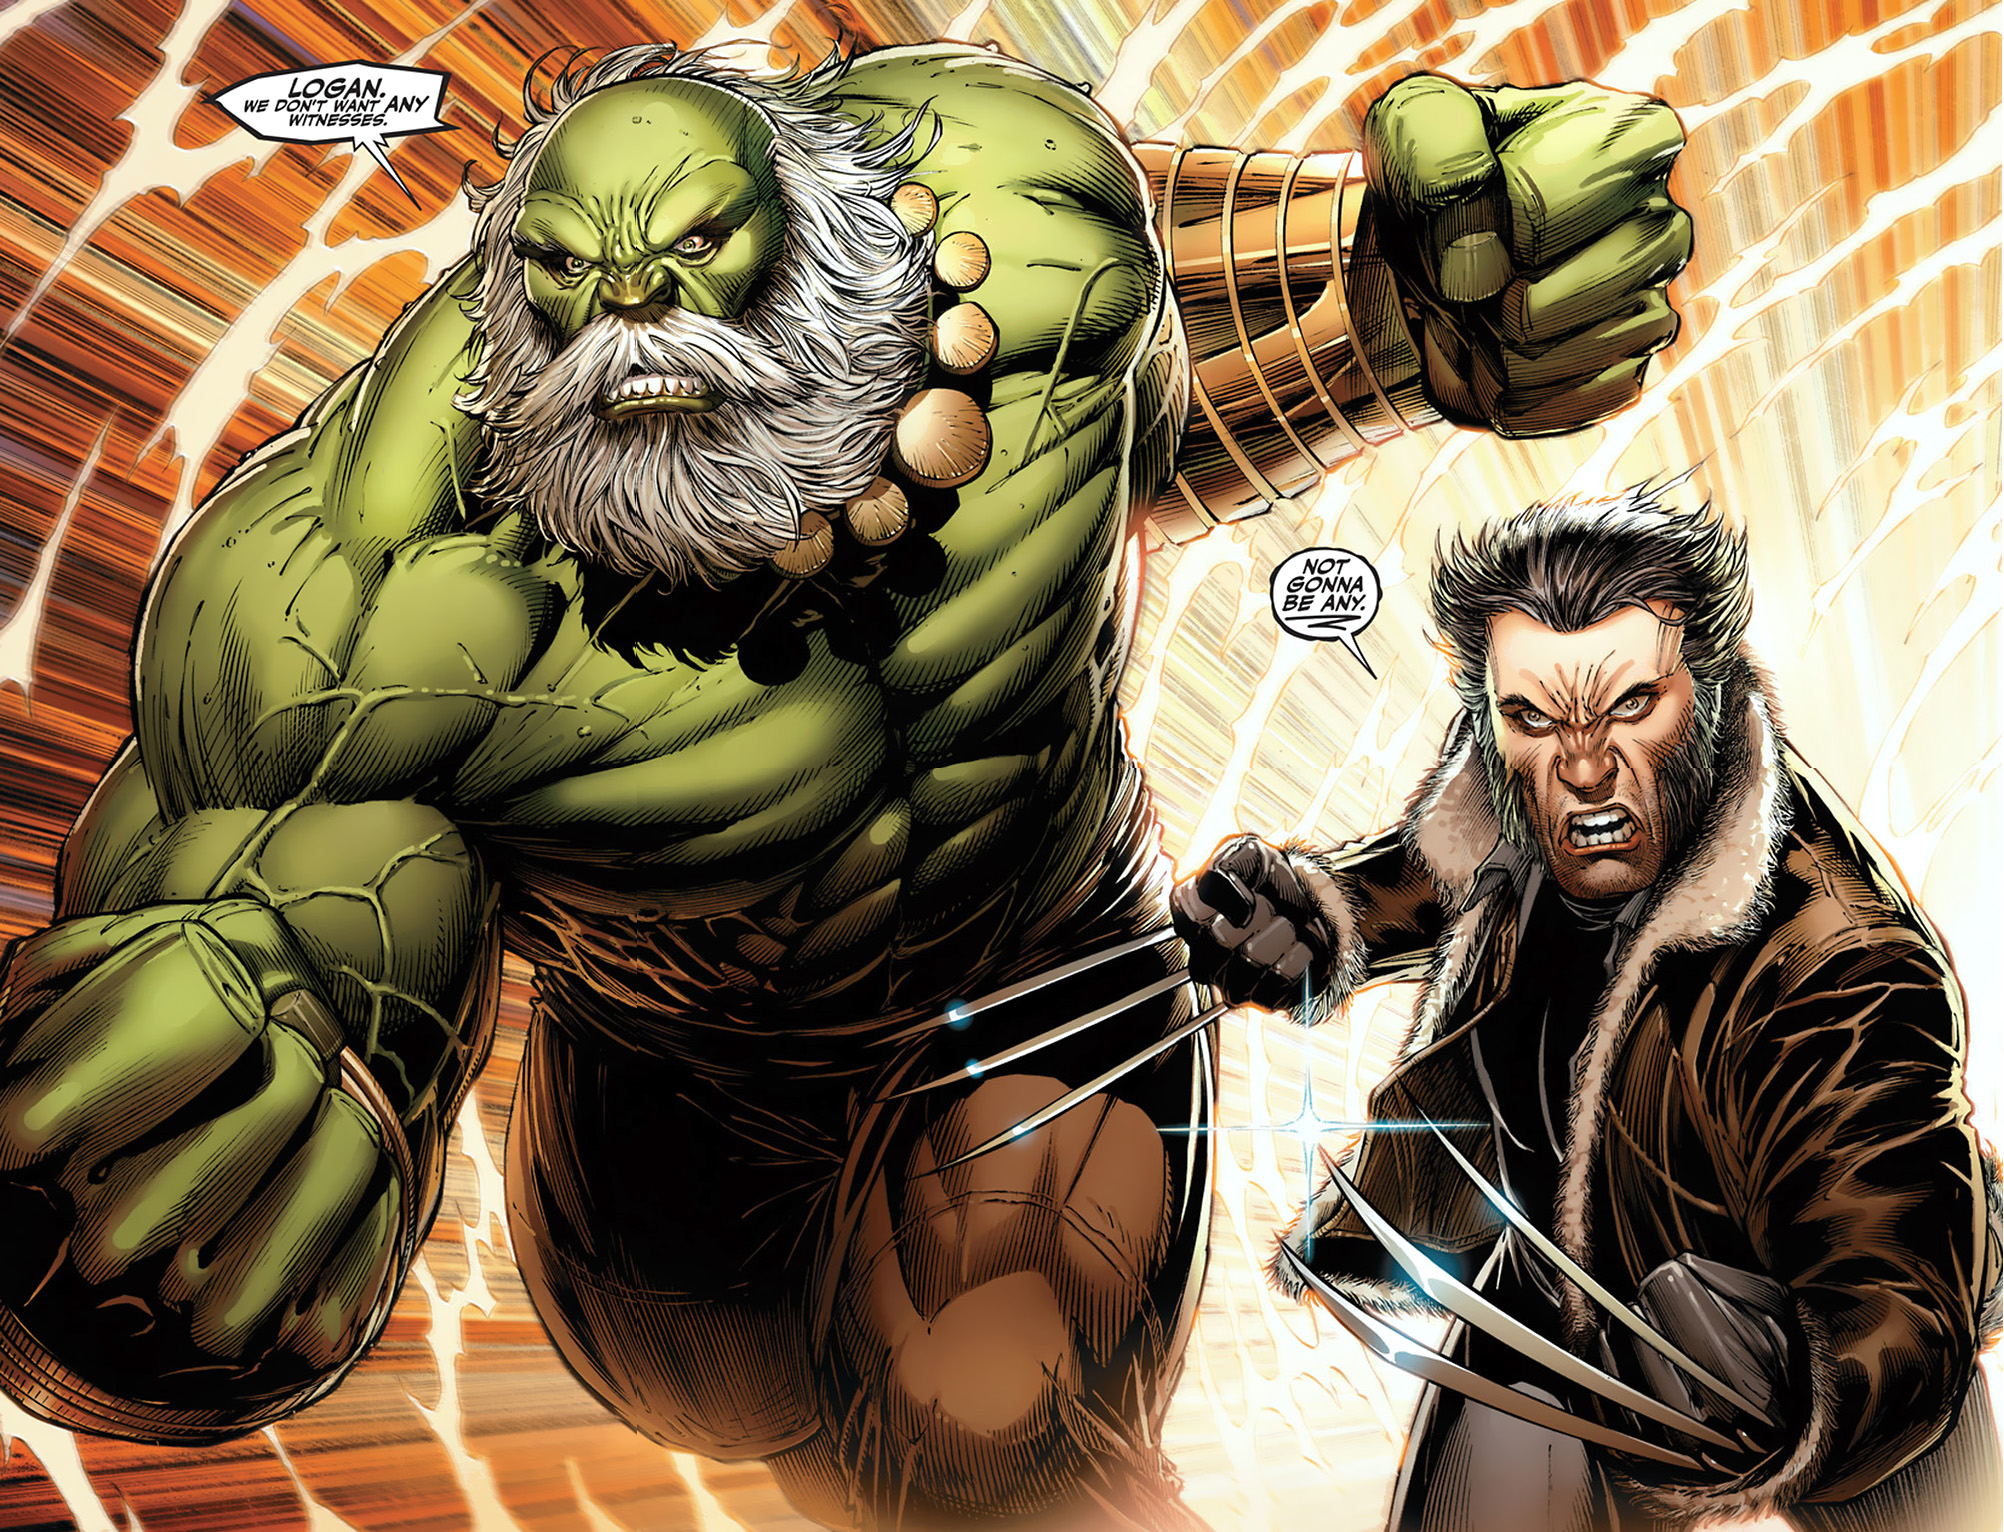 The Hulk and wolverine vs their future selves